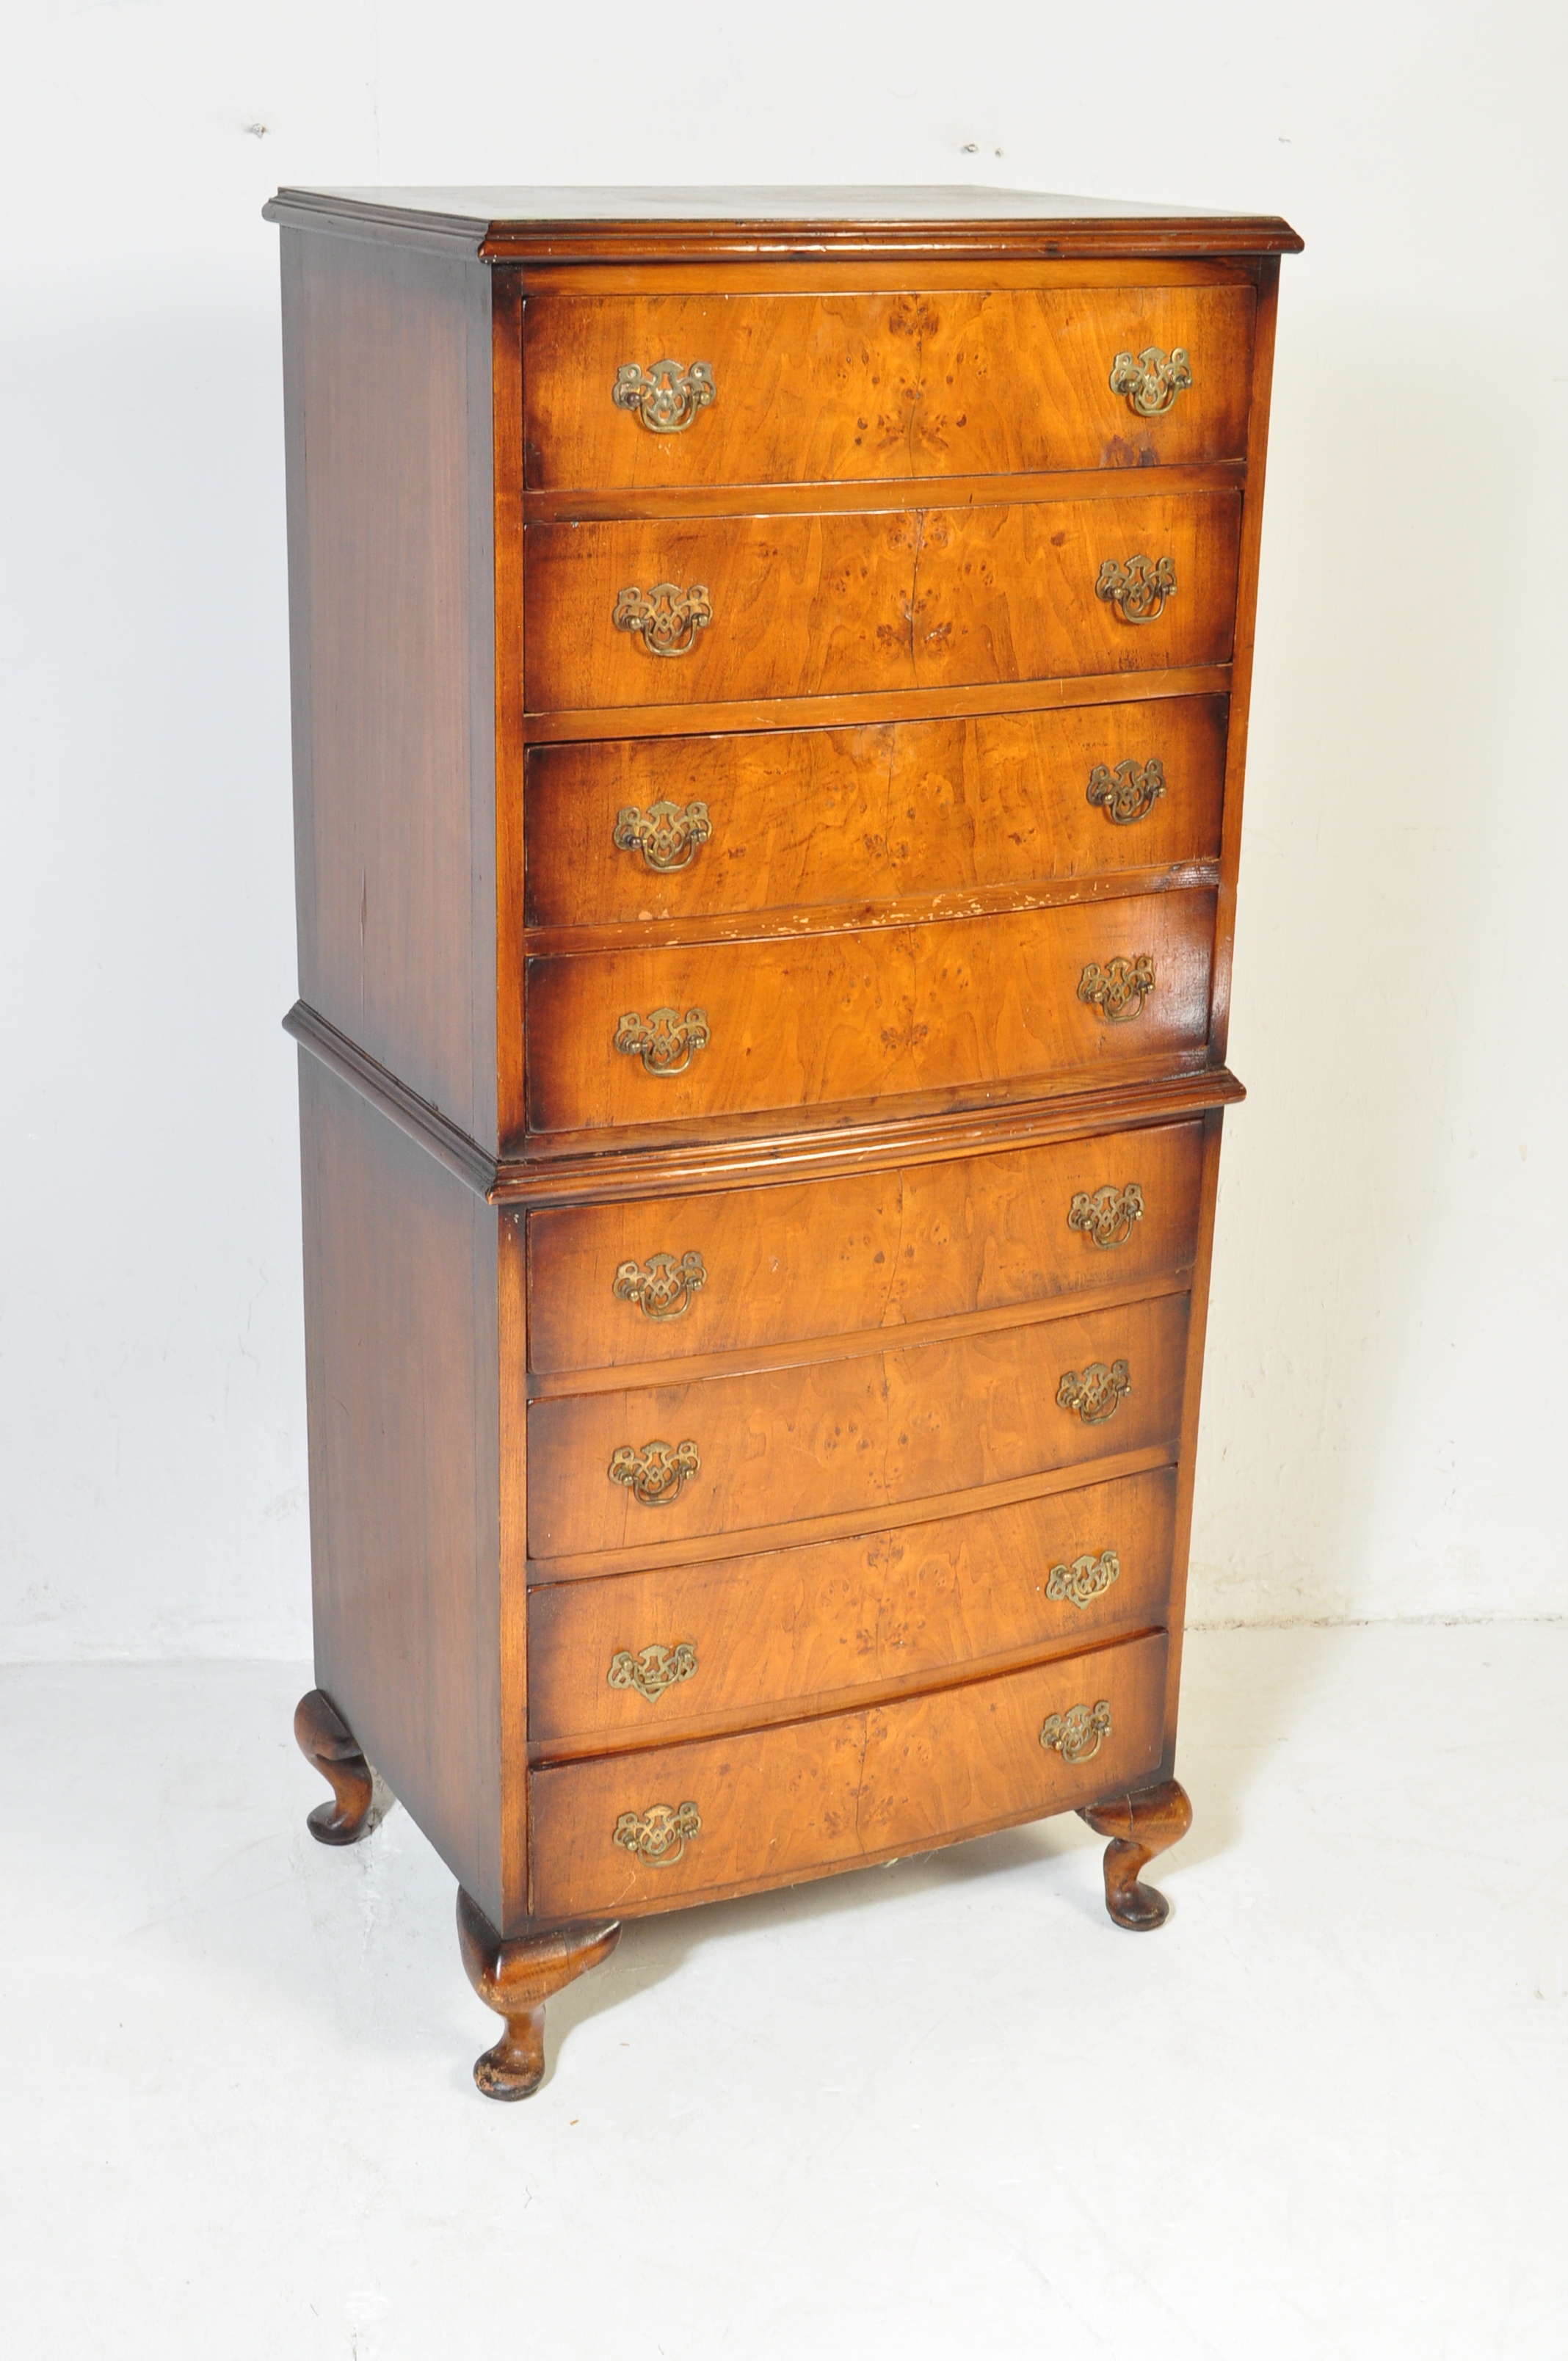 VINTAGE QUEEN ANNE REVIVAL ATTIC CHEST OF DRAWERS - Image 2 of 6